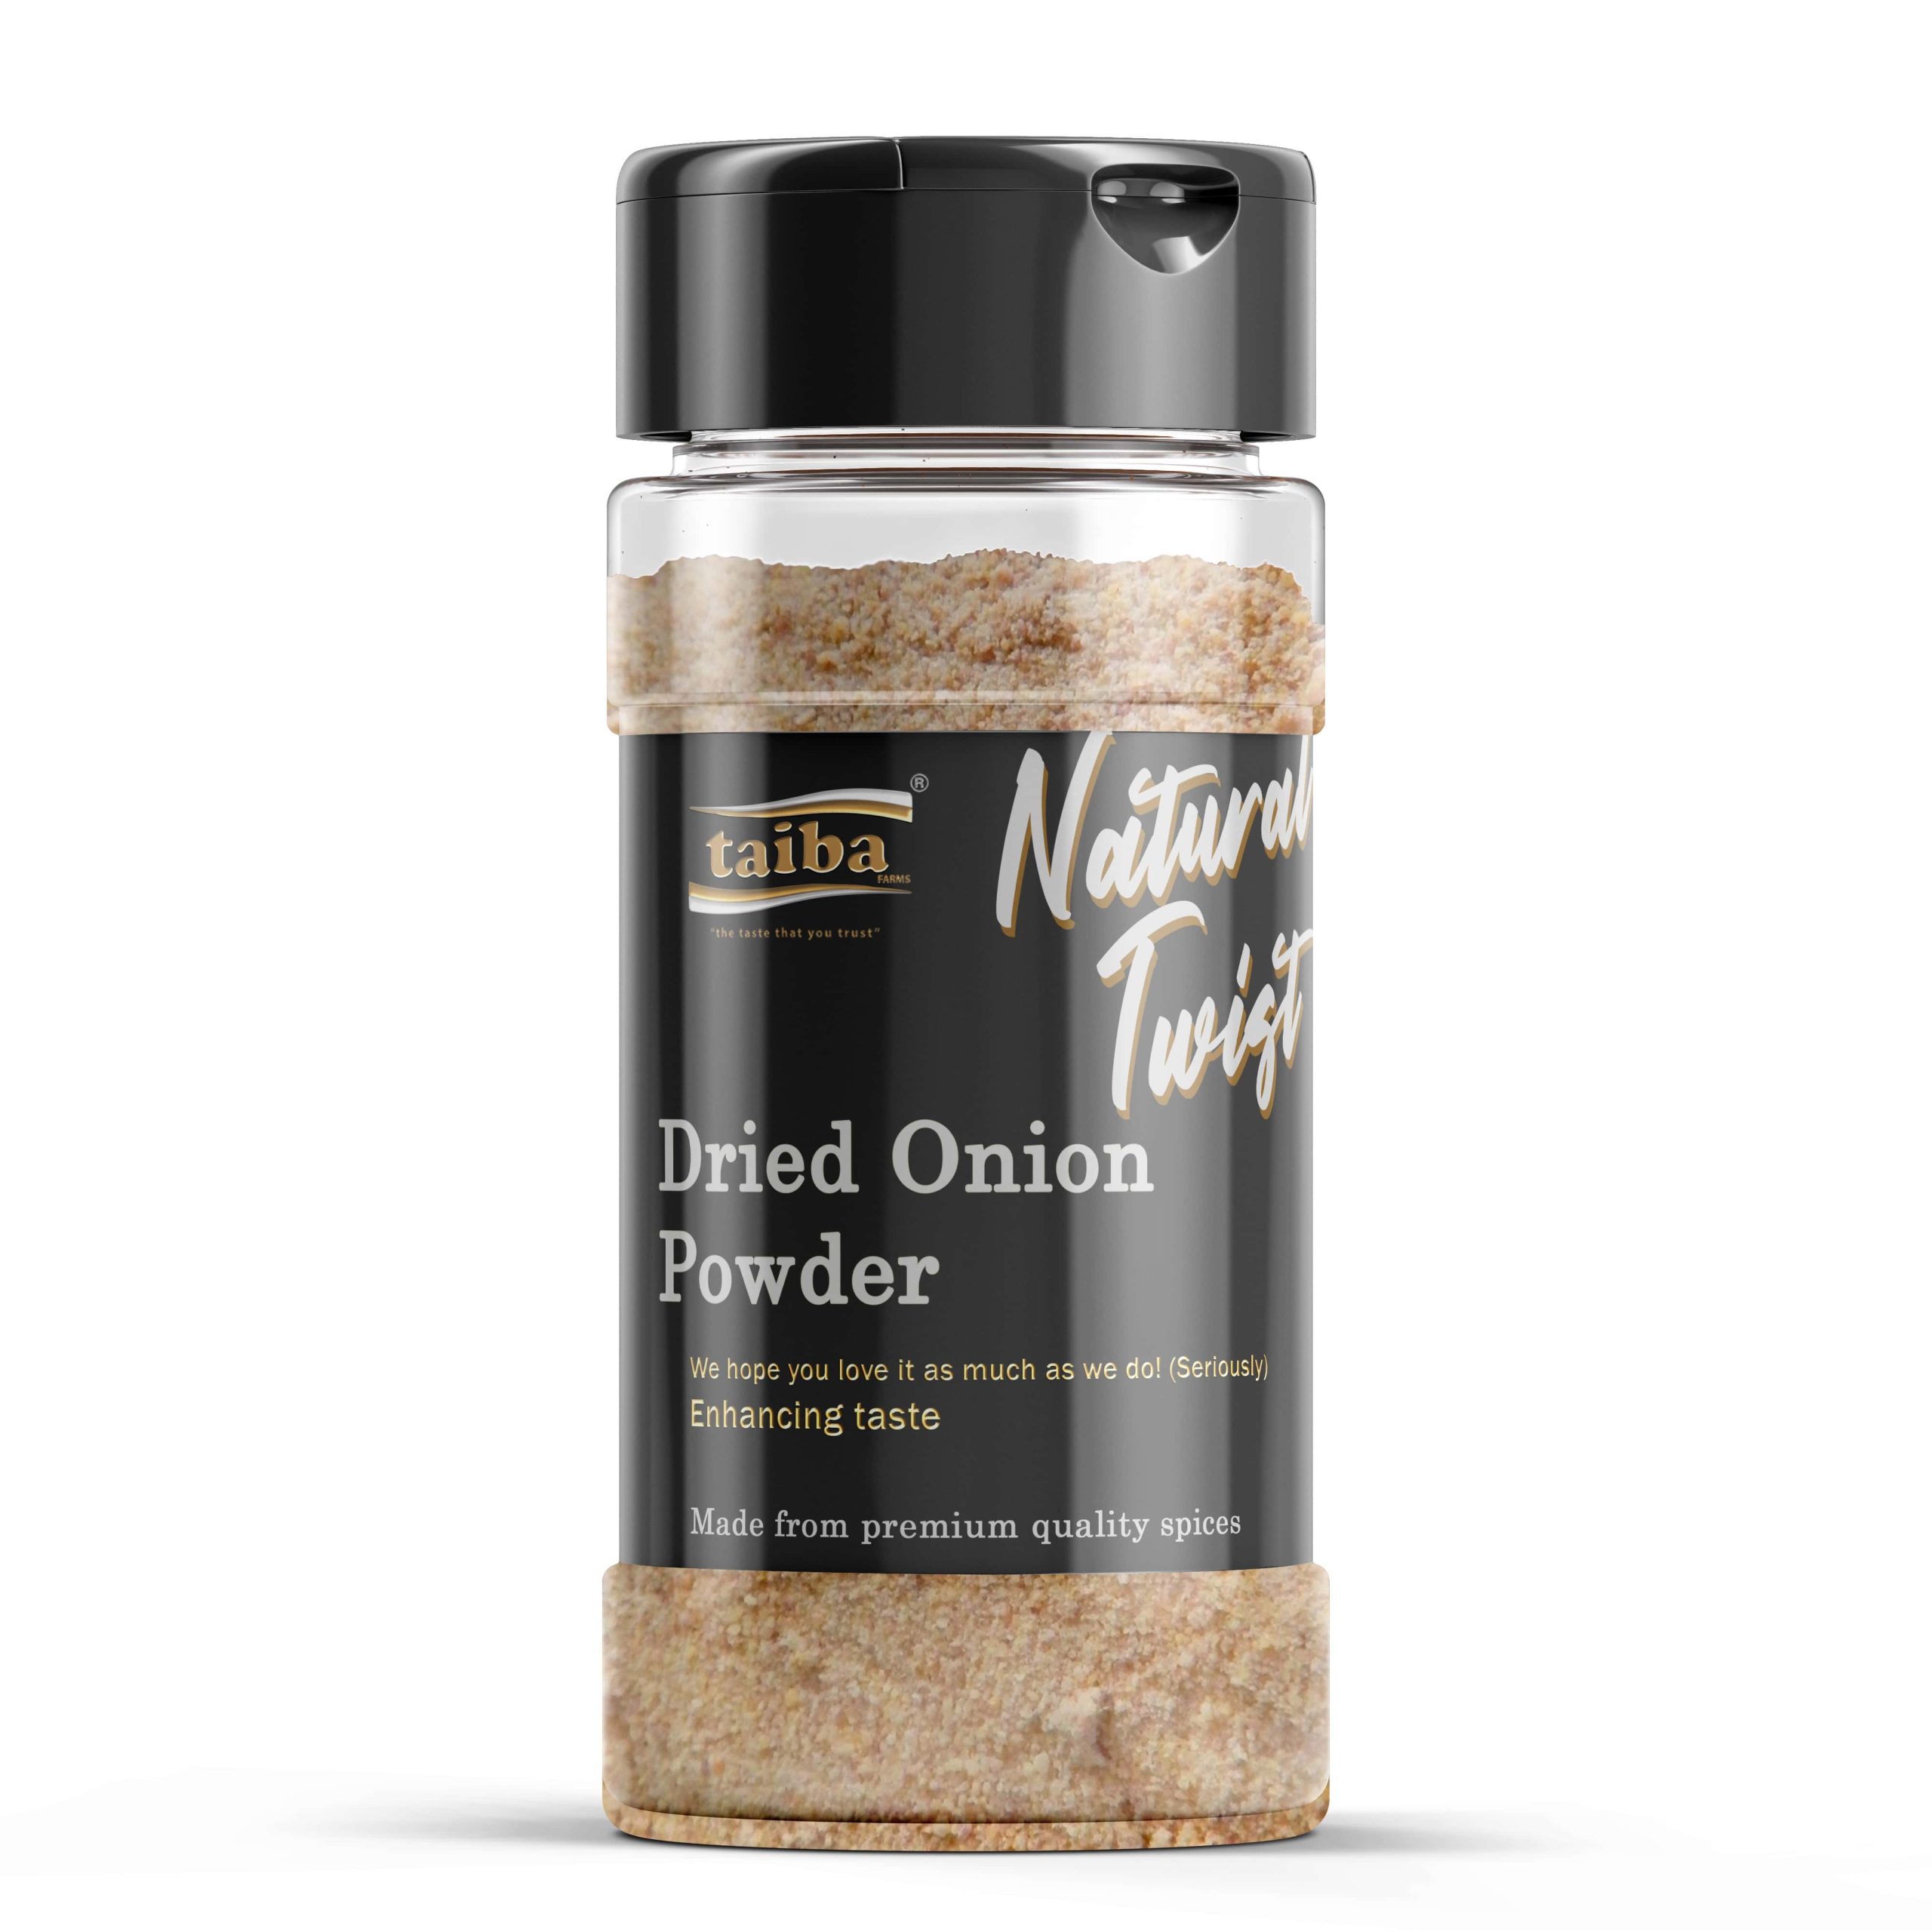 Dried-Onion-shop-online-online-grocery-hearps-and-spices-online-home-delivery-in-UAE-Dubai-Abu-Dhabi-and-Sharjah